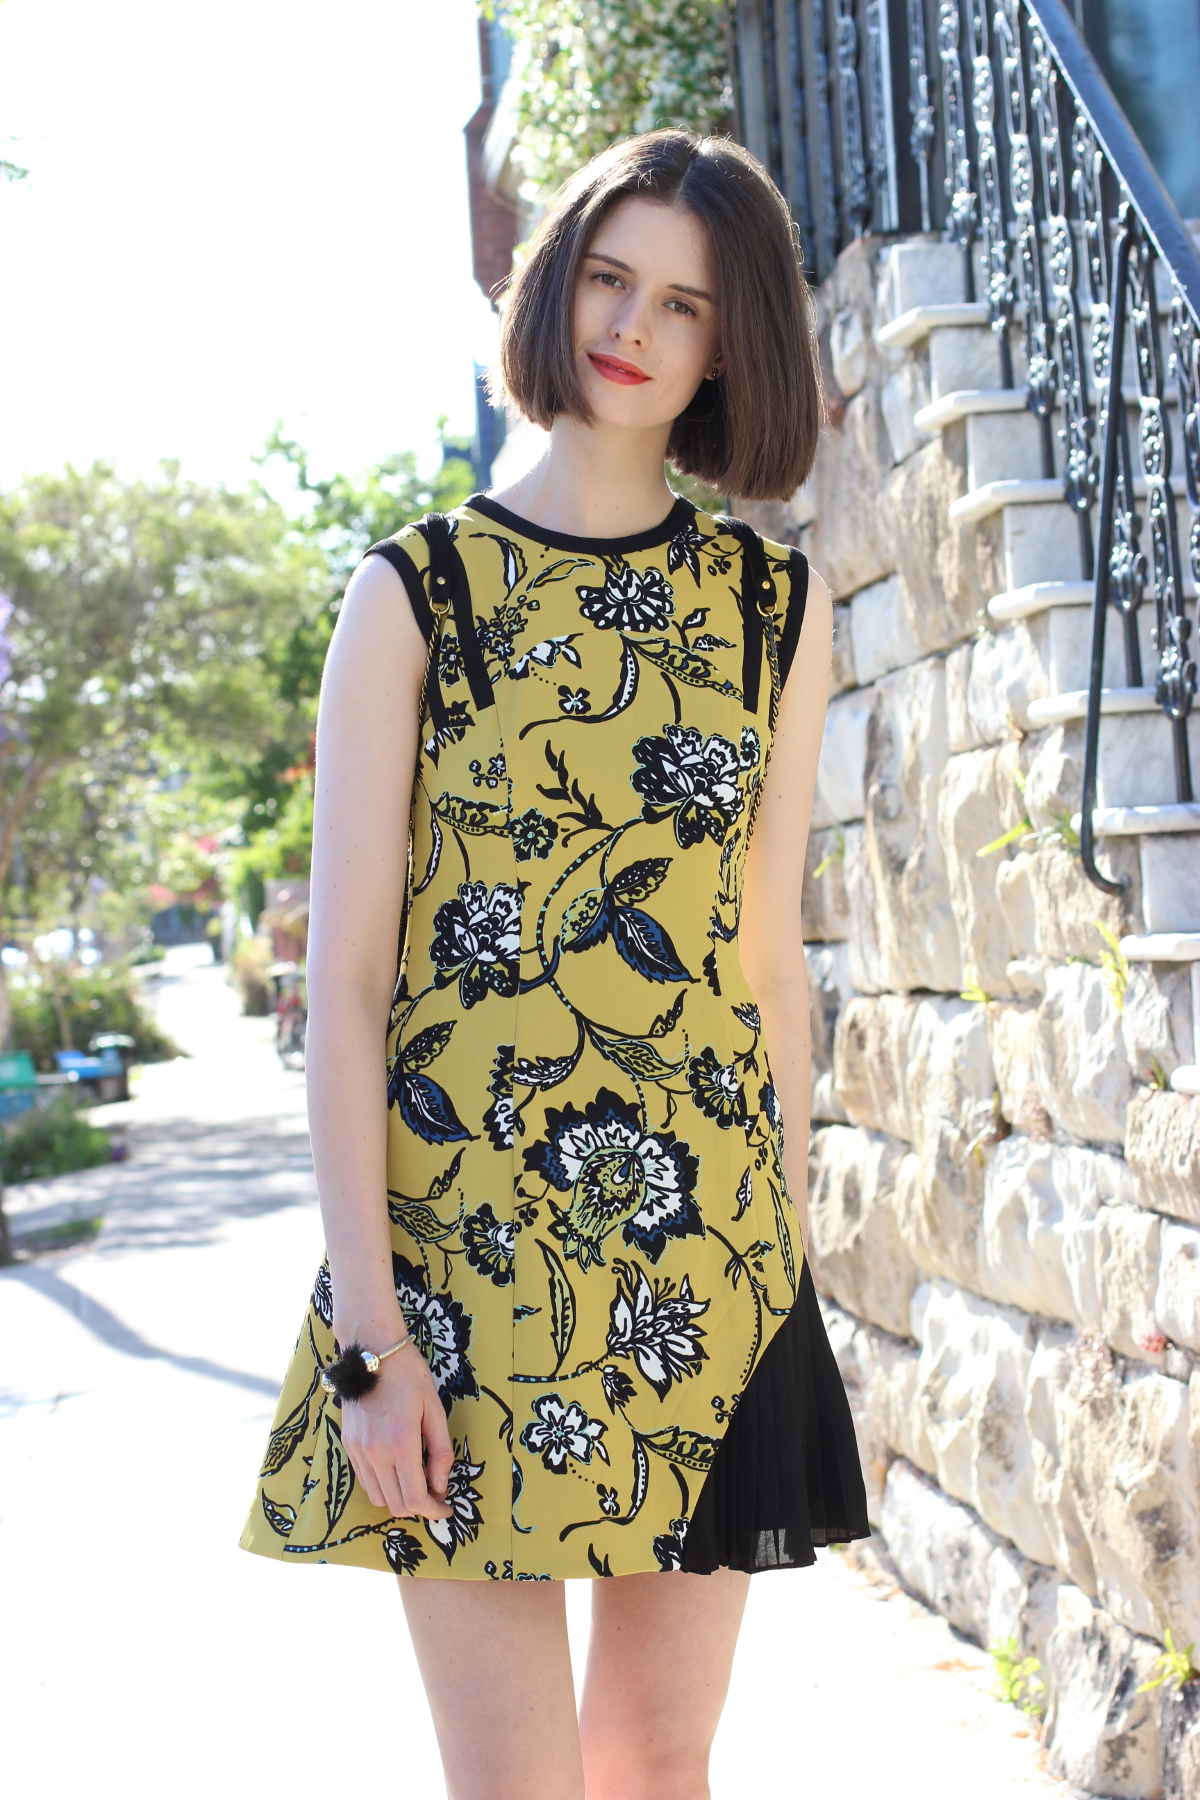 BYCHILL Chloe Hill in Cue Clothing Passionflower Crepe Floral print Dress in Paddington, Sydney